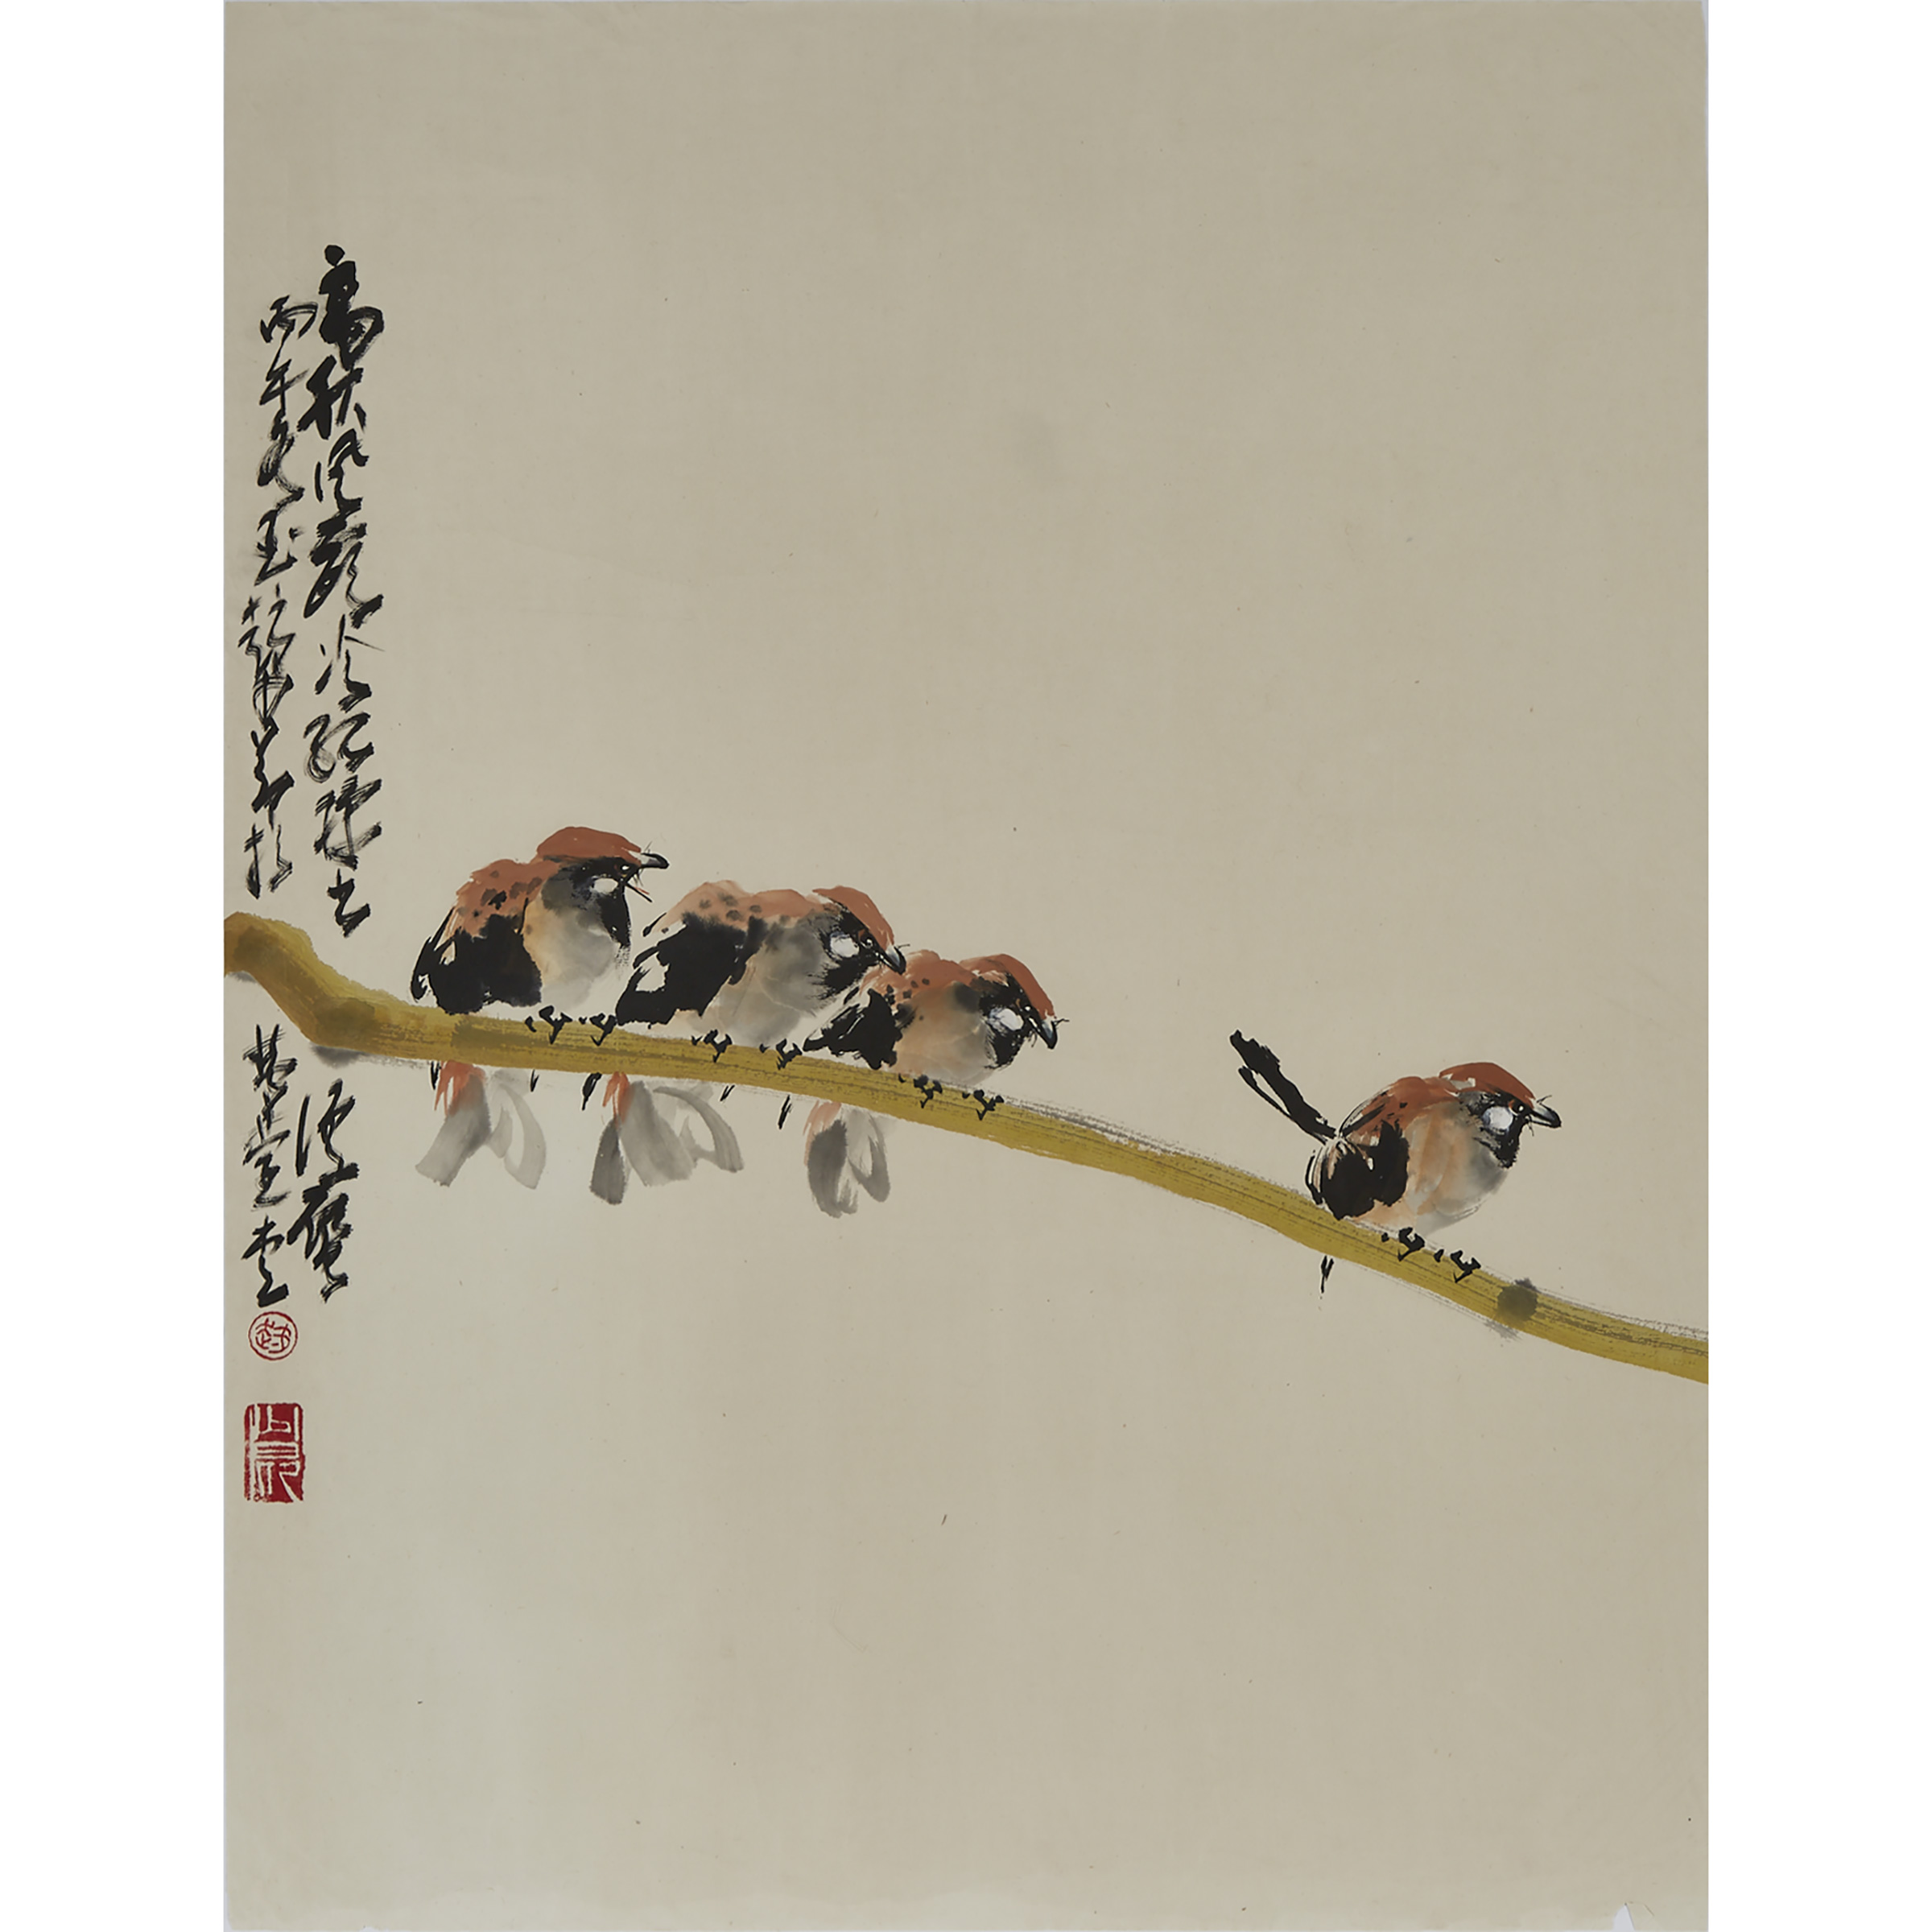 Attributed to Zhao Shao'ang (1905-1998), Four Sparrows